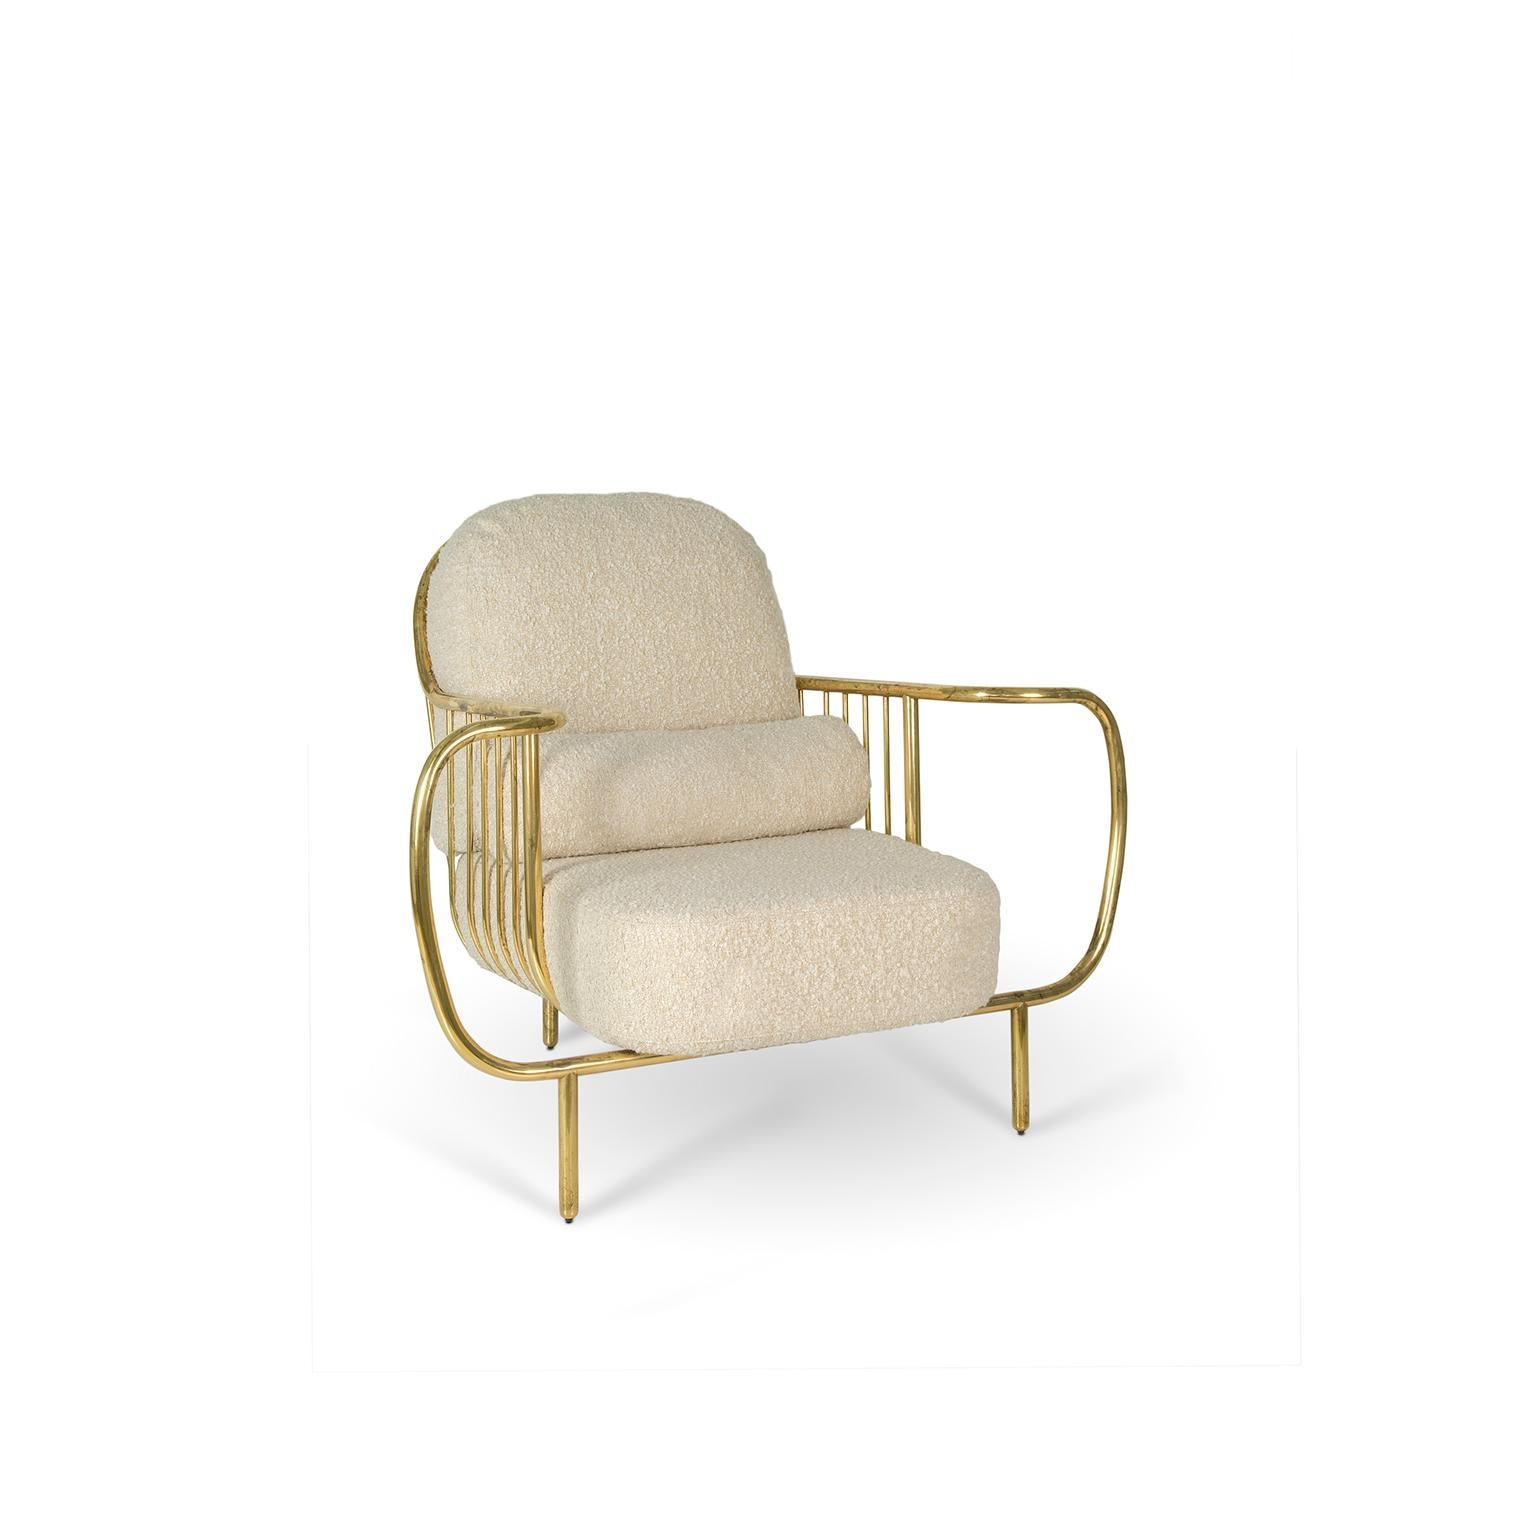 Metal Modern Liberty Armchair Low Back Aged Polished Brass and Beige Bouclé Cushions For Sale